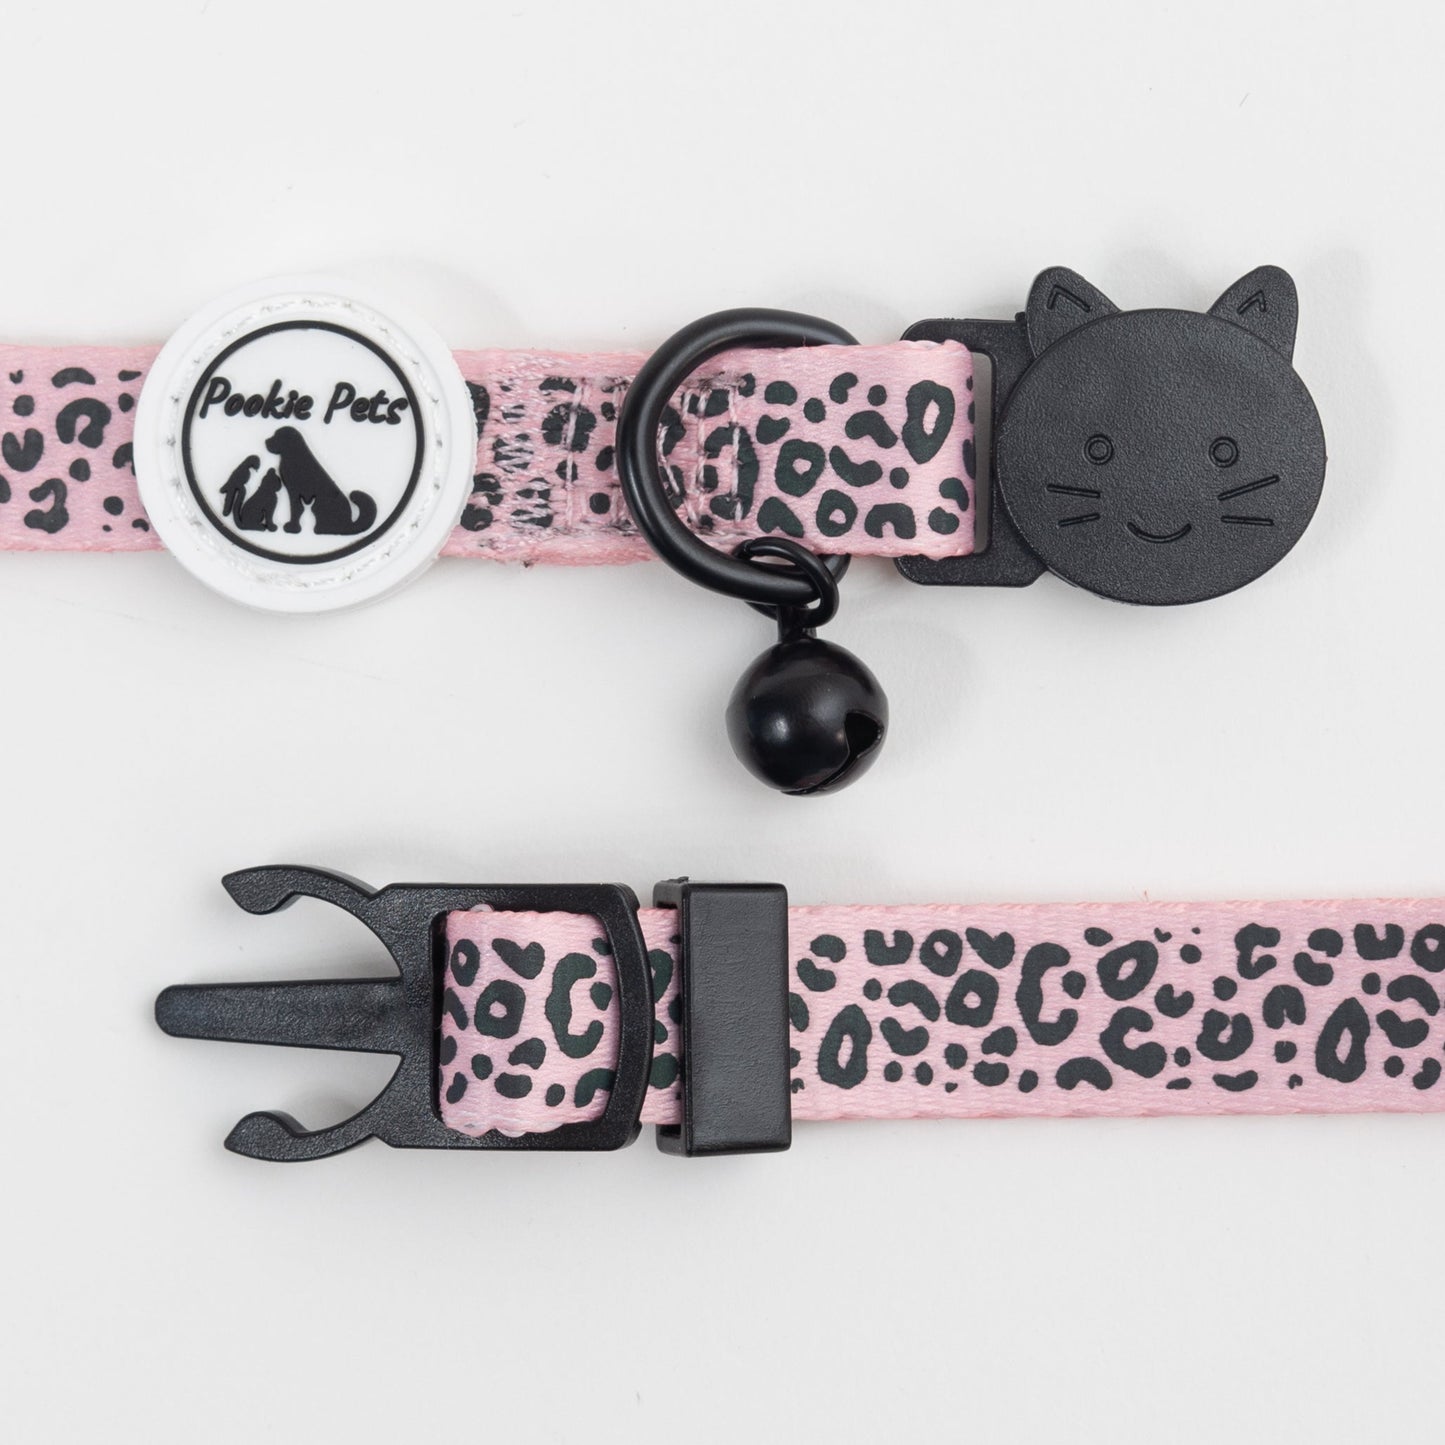 Reflective Comfort Cat Collar with Leopard Print by Pookie Pets